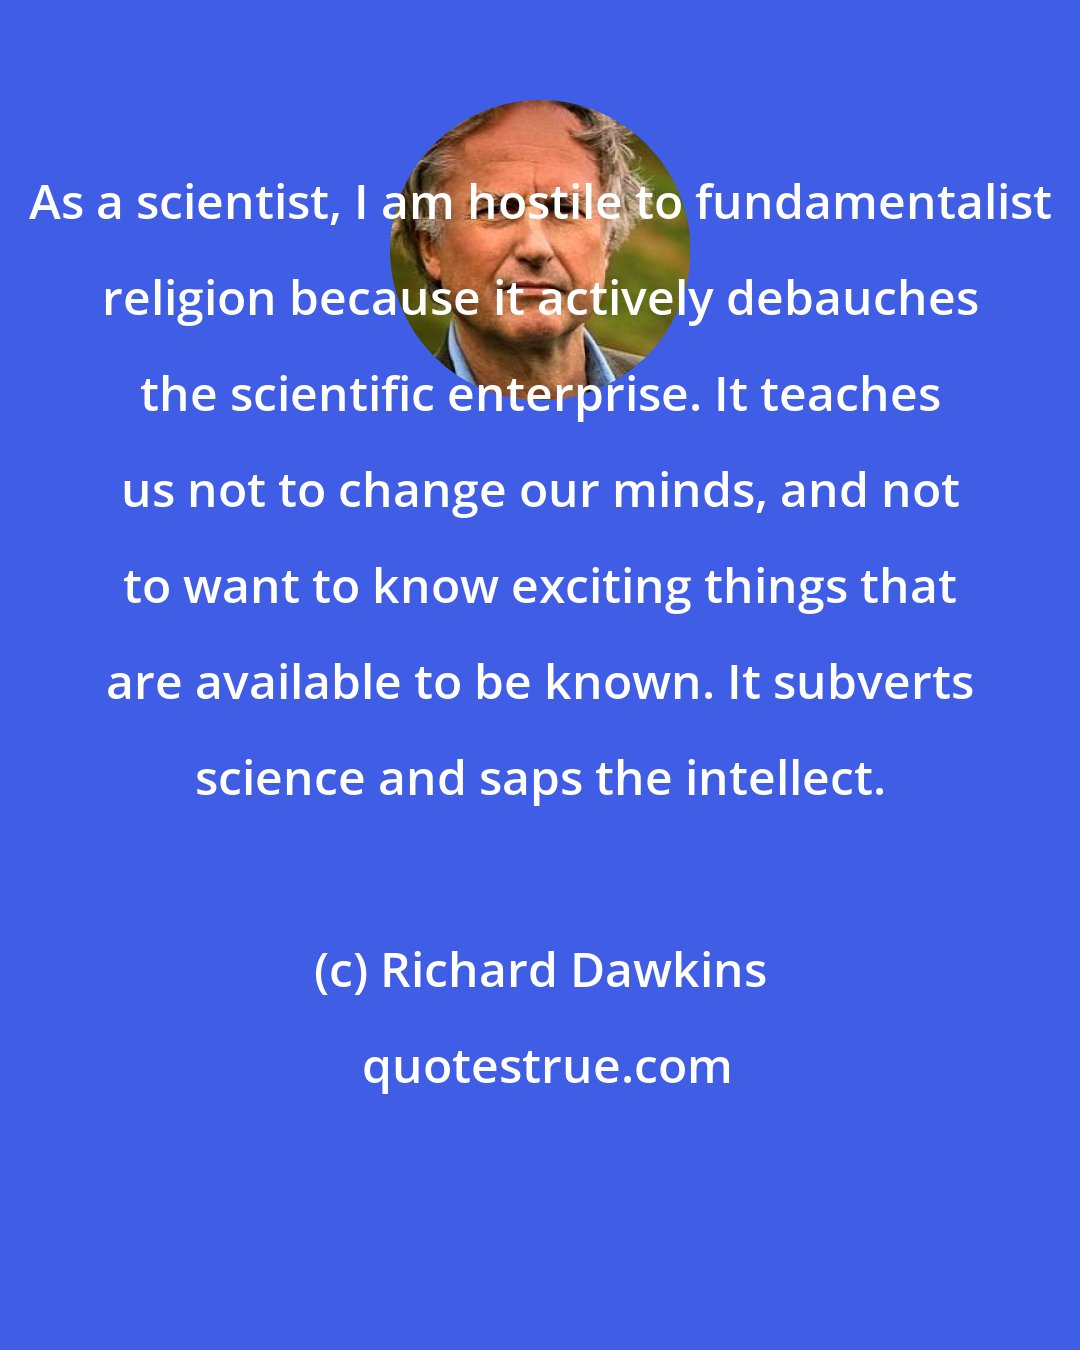 Richard Dawkins: As a scientist, I am hostile to fundamentalist religion because it actively debauches the scientific enterprise. It teaches us not to change our minds, and not to want to know exciting things that are available to be known. It subverts science and saps the intellect.